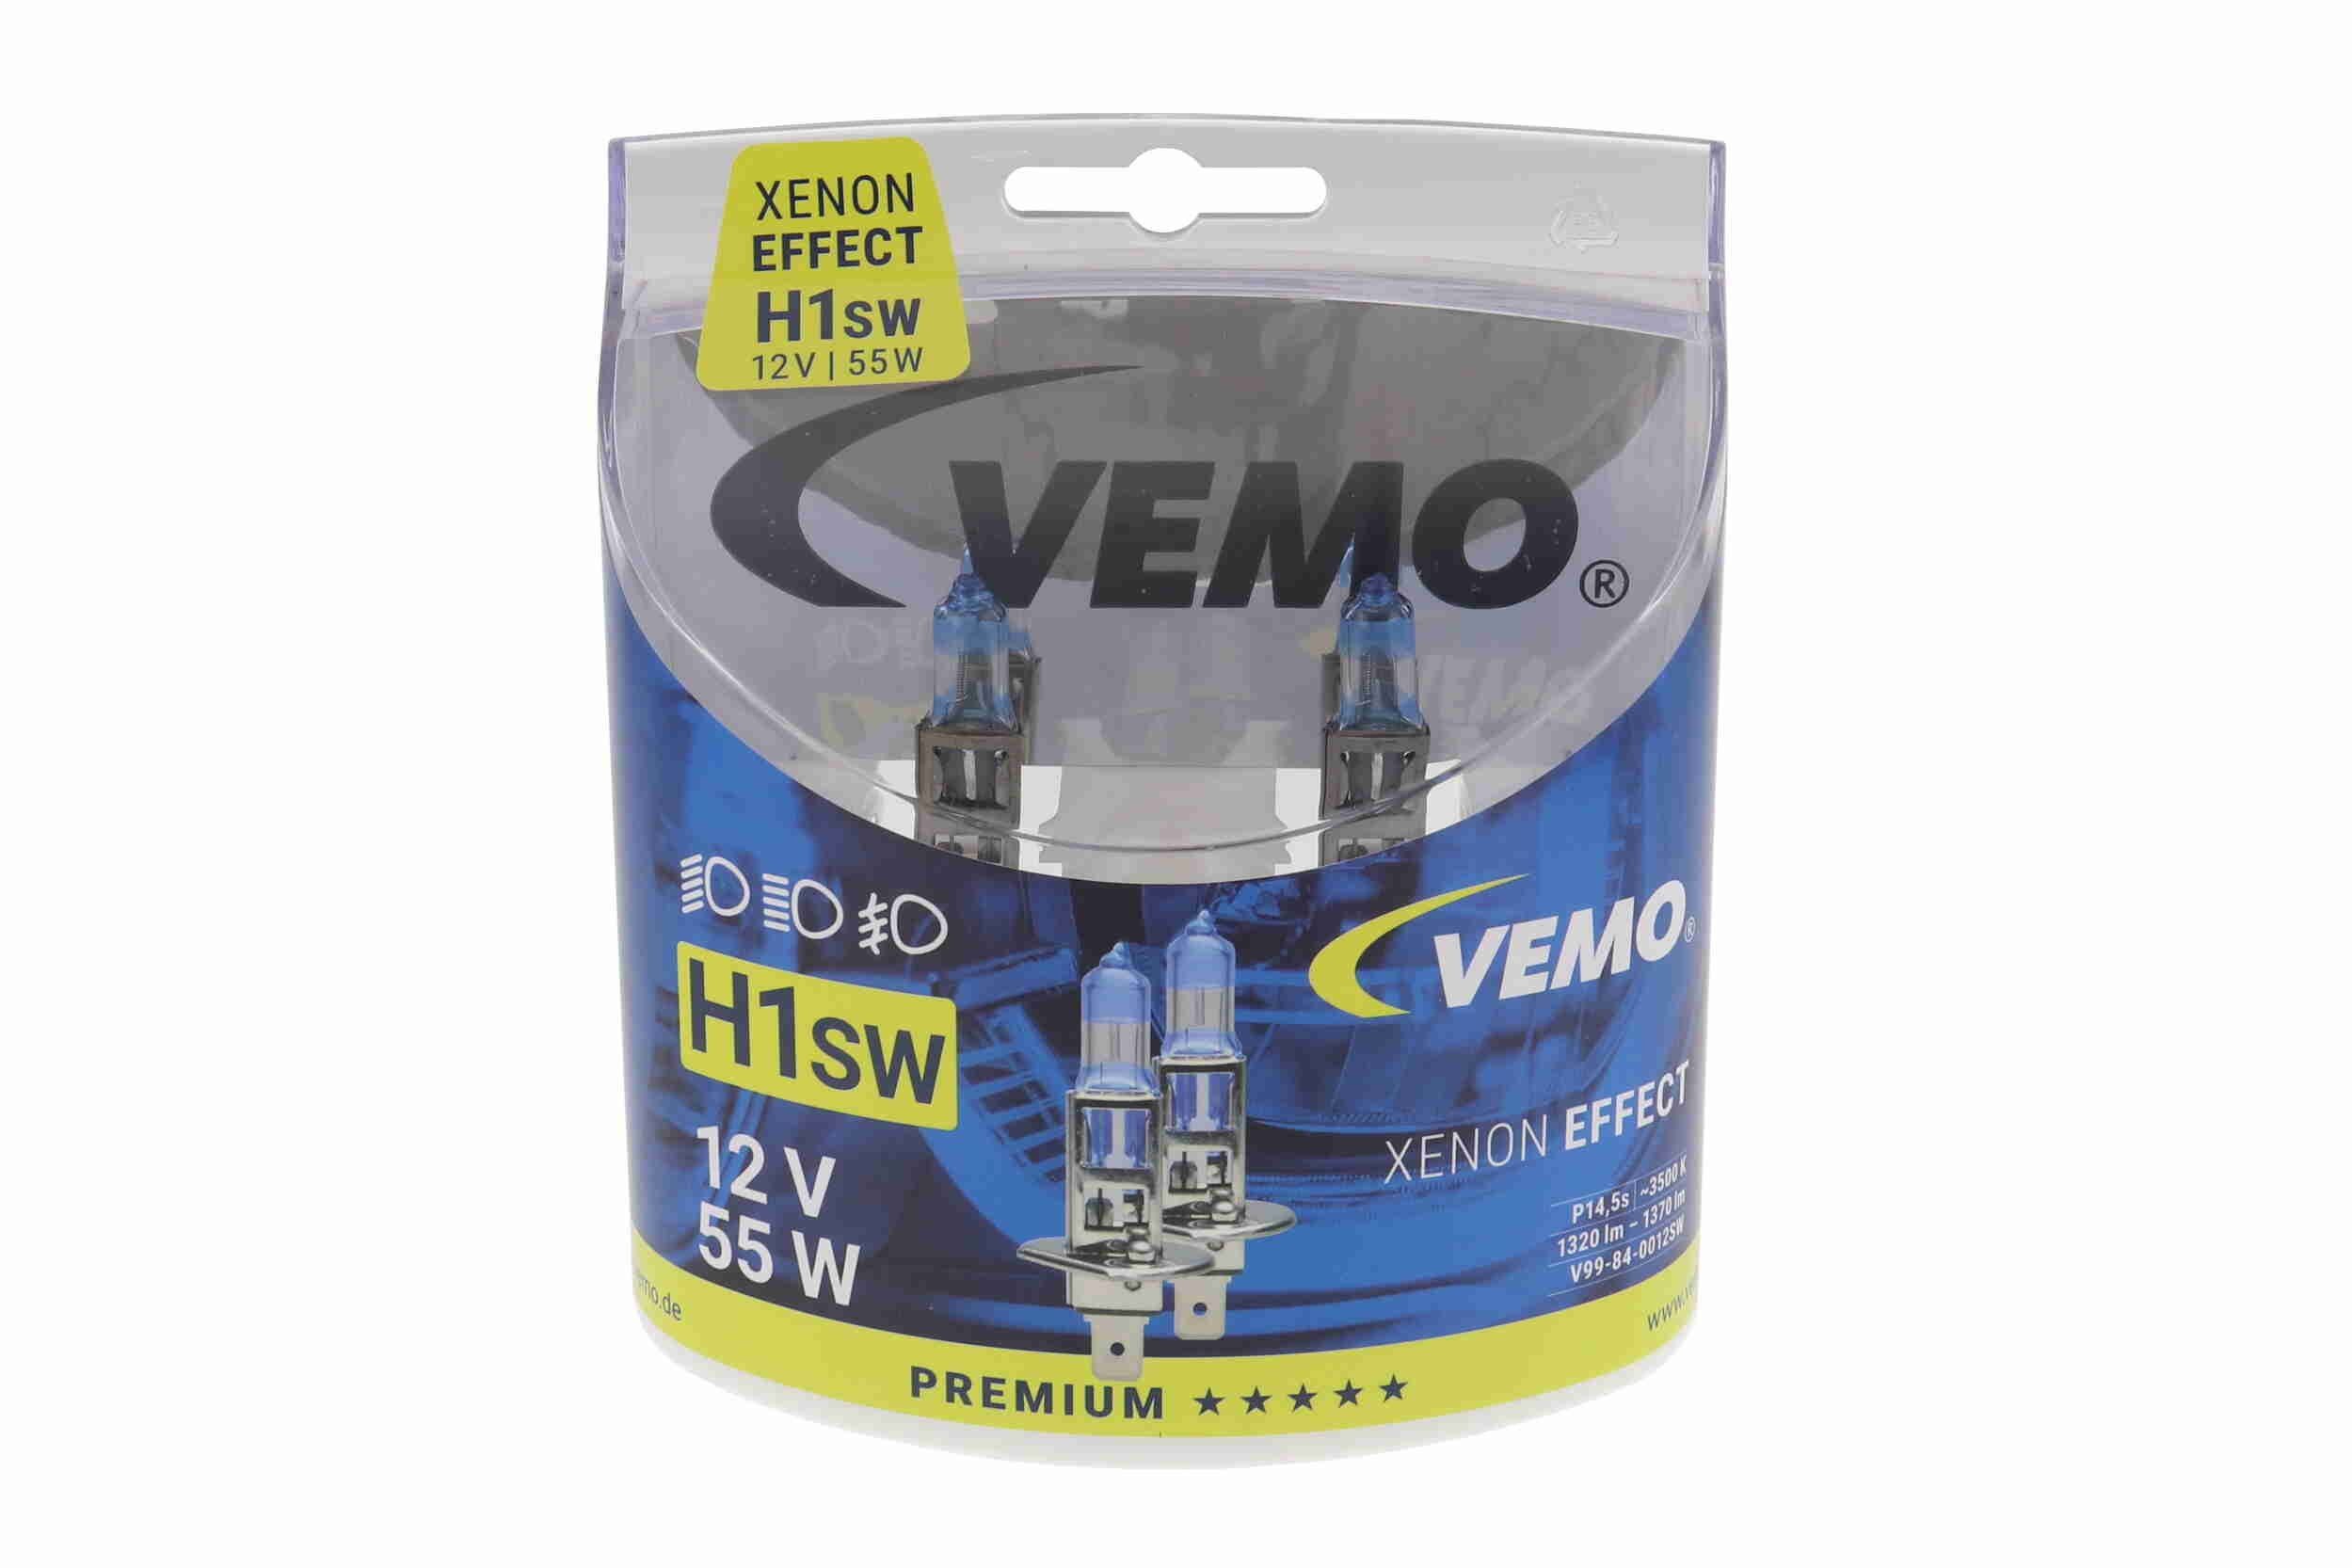 VEMO V99-84-0012SW Headlight bulb ROVER experience and price